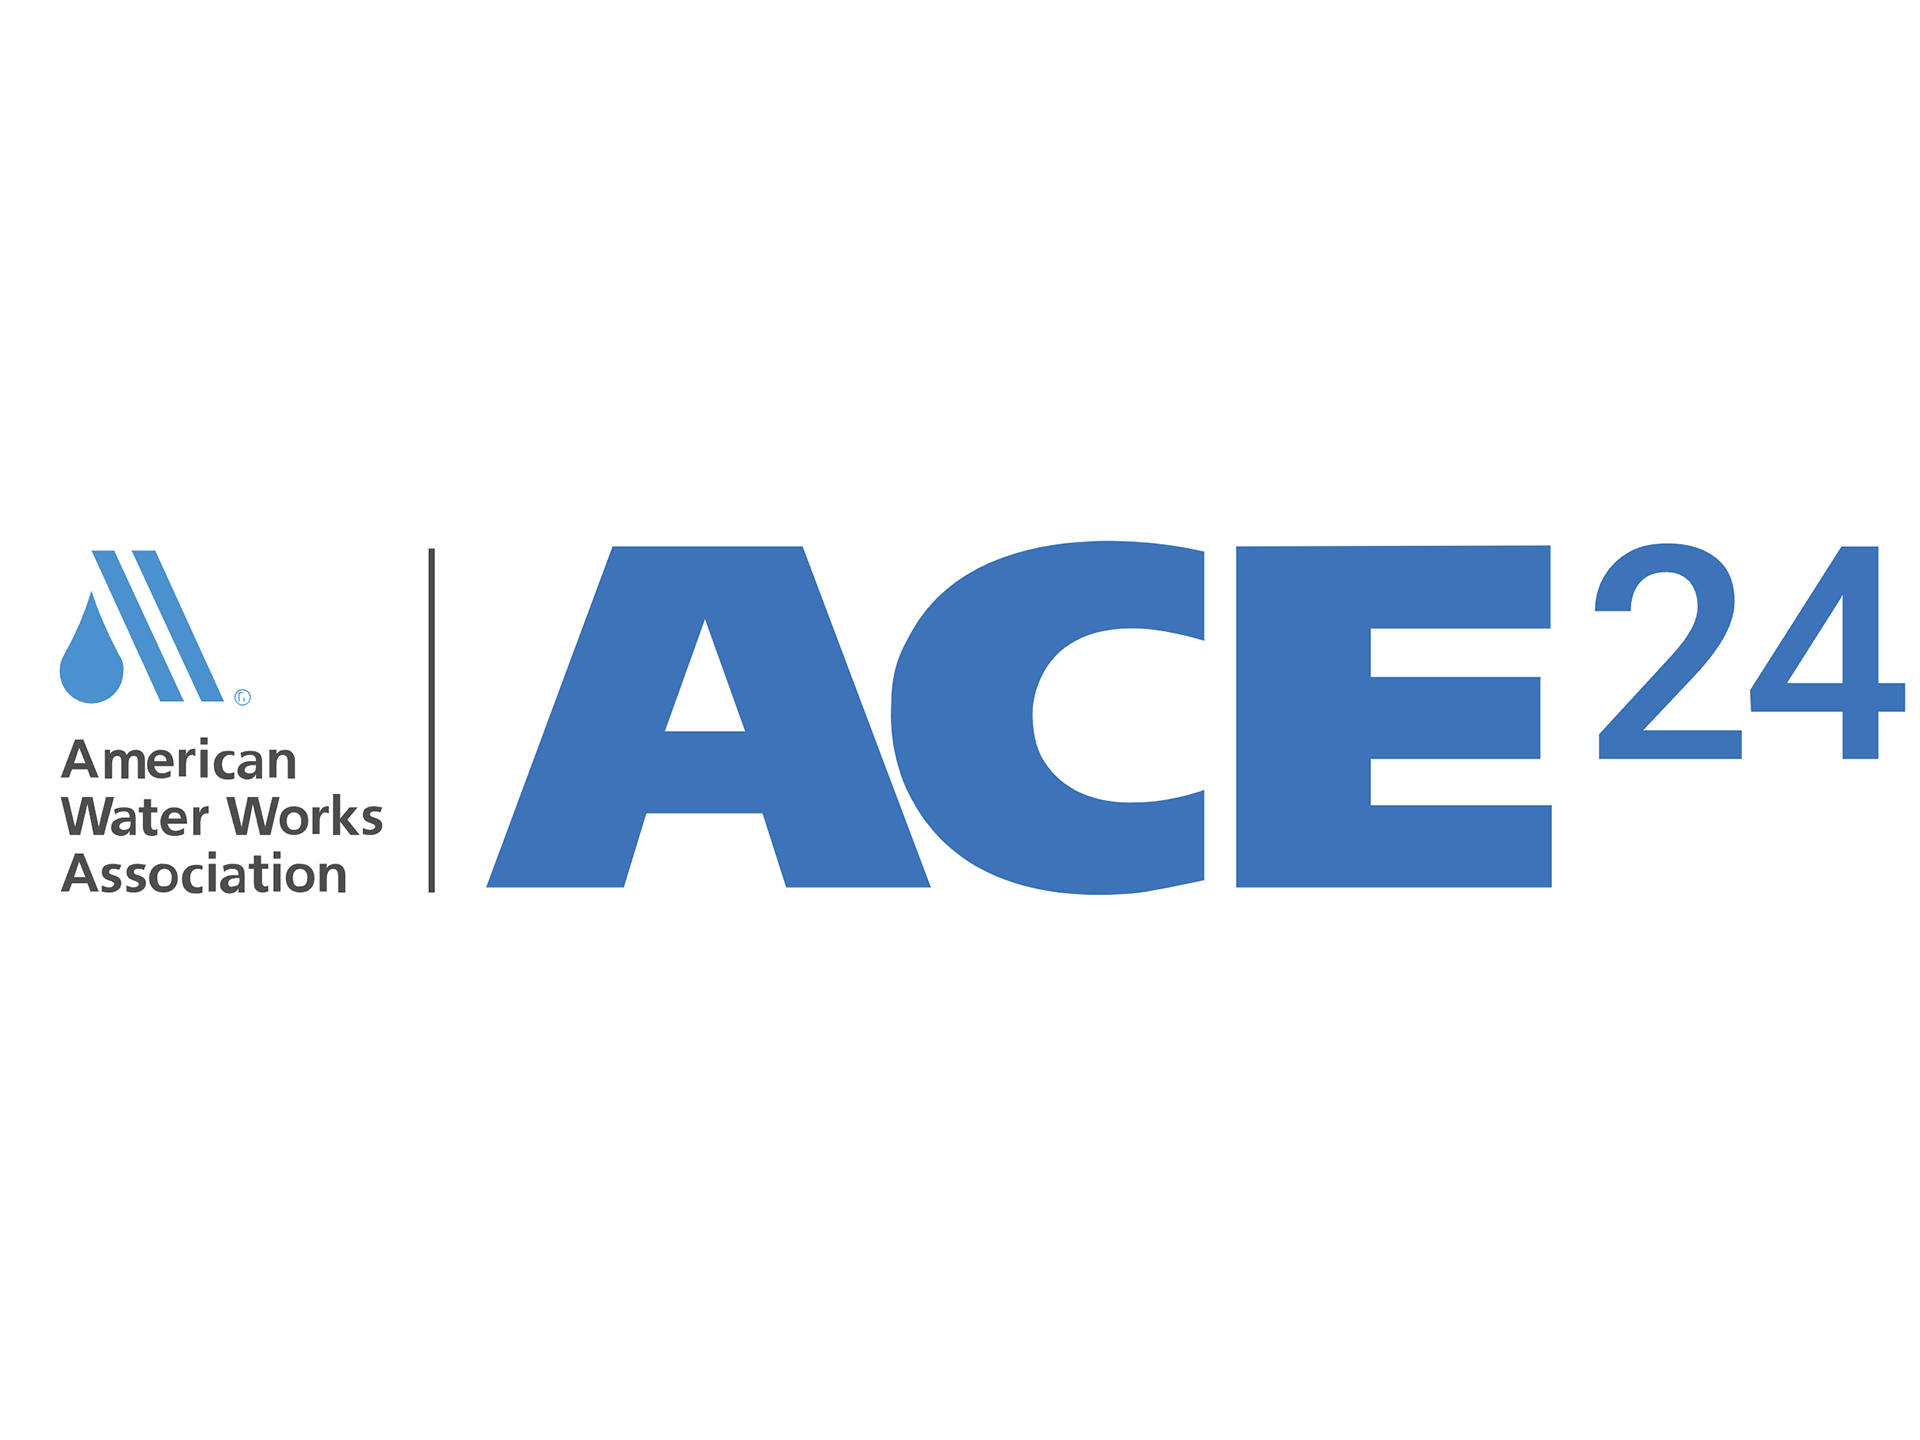 Chemtrac to Exhibit at AWWA ACE24 in Anaheim, CA